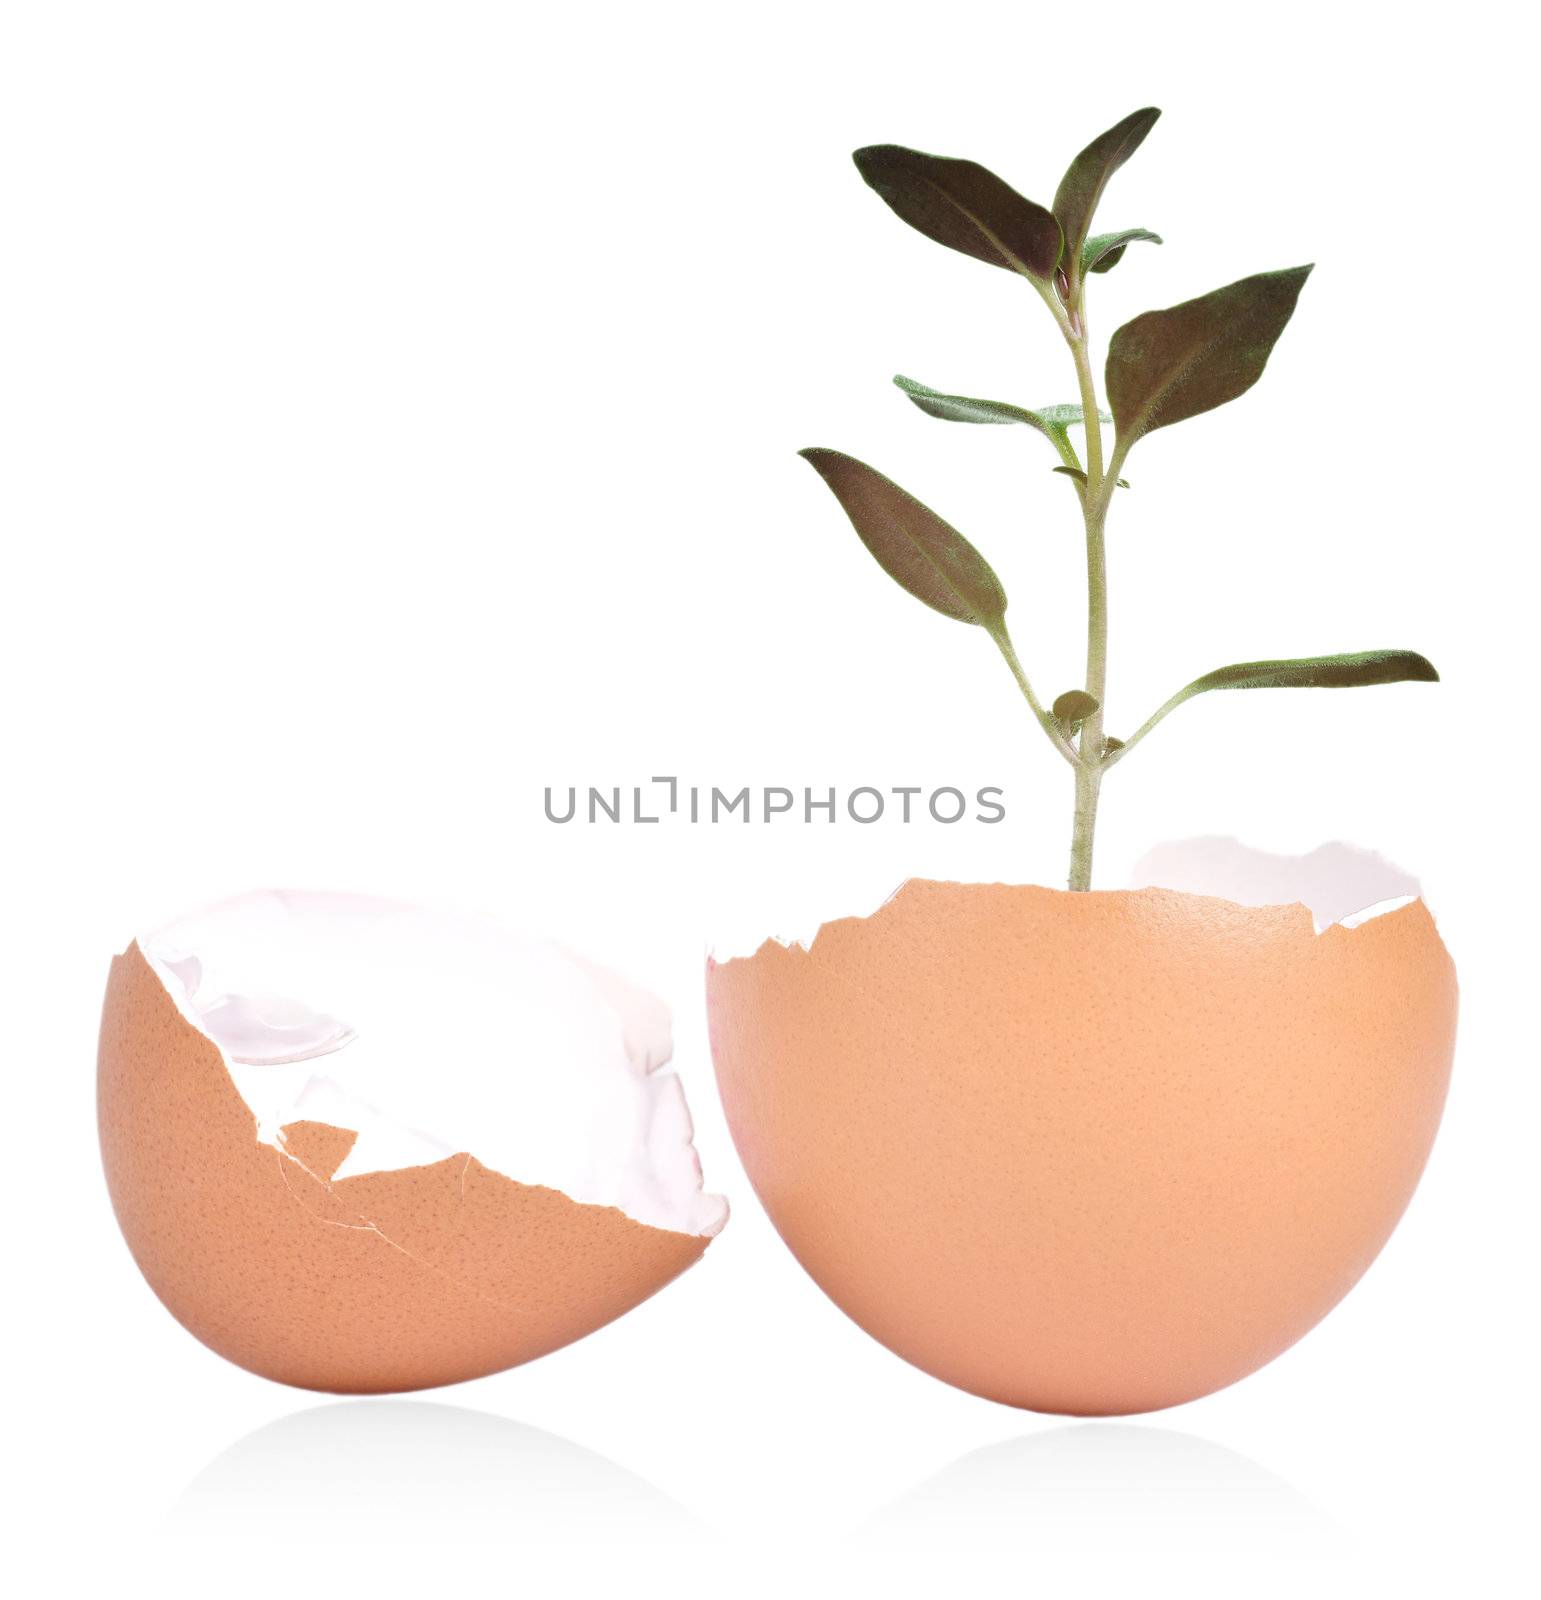 Plant sprouts from a broken egg shell on a white background